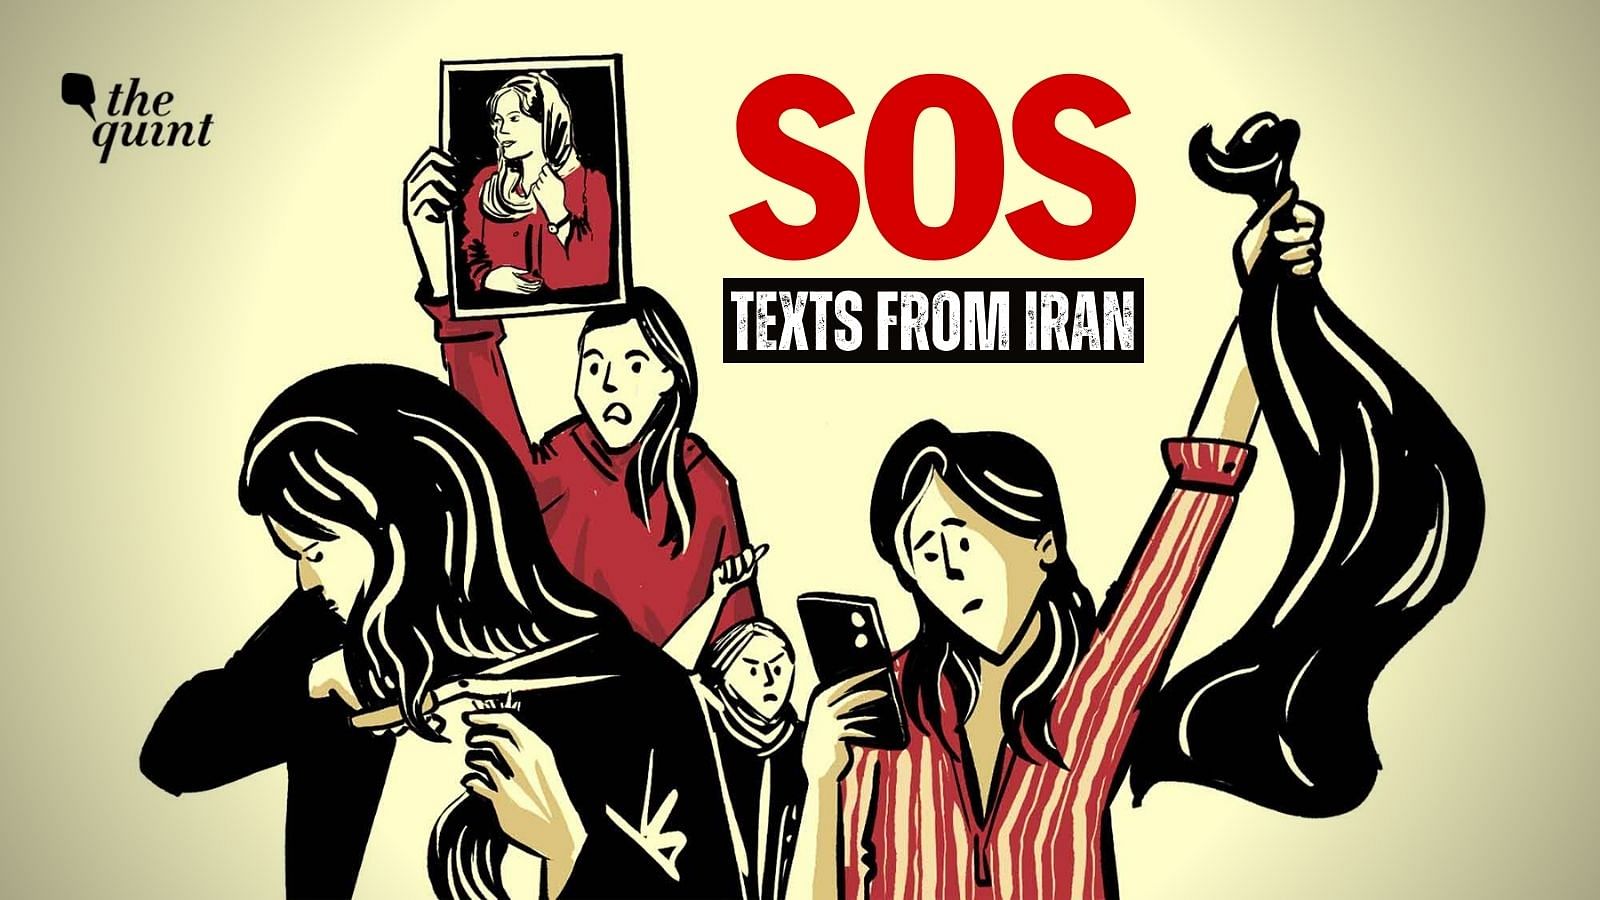 <div class="paragraphs"><p>Read the SOS messages sent by Iranian women protesters on WhatsApp and Telegram, before they lost internet access.</p></div>